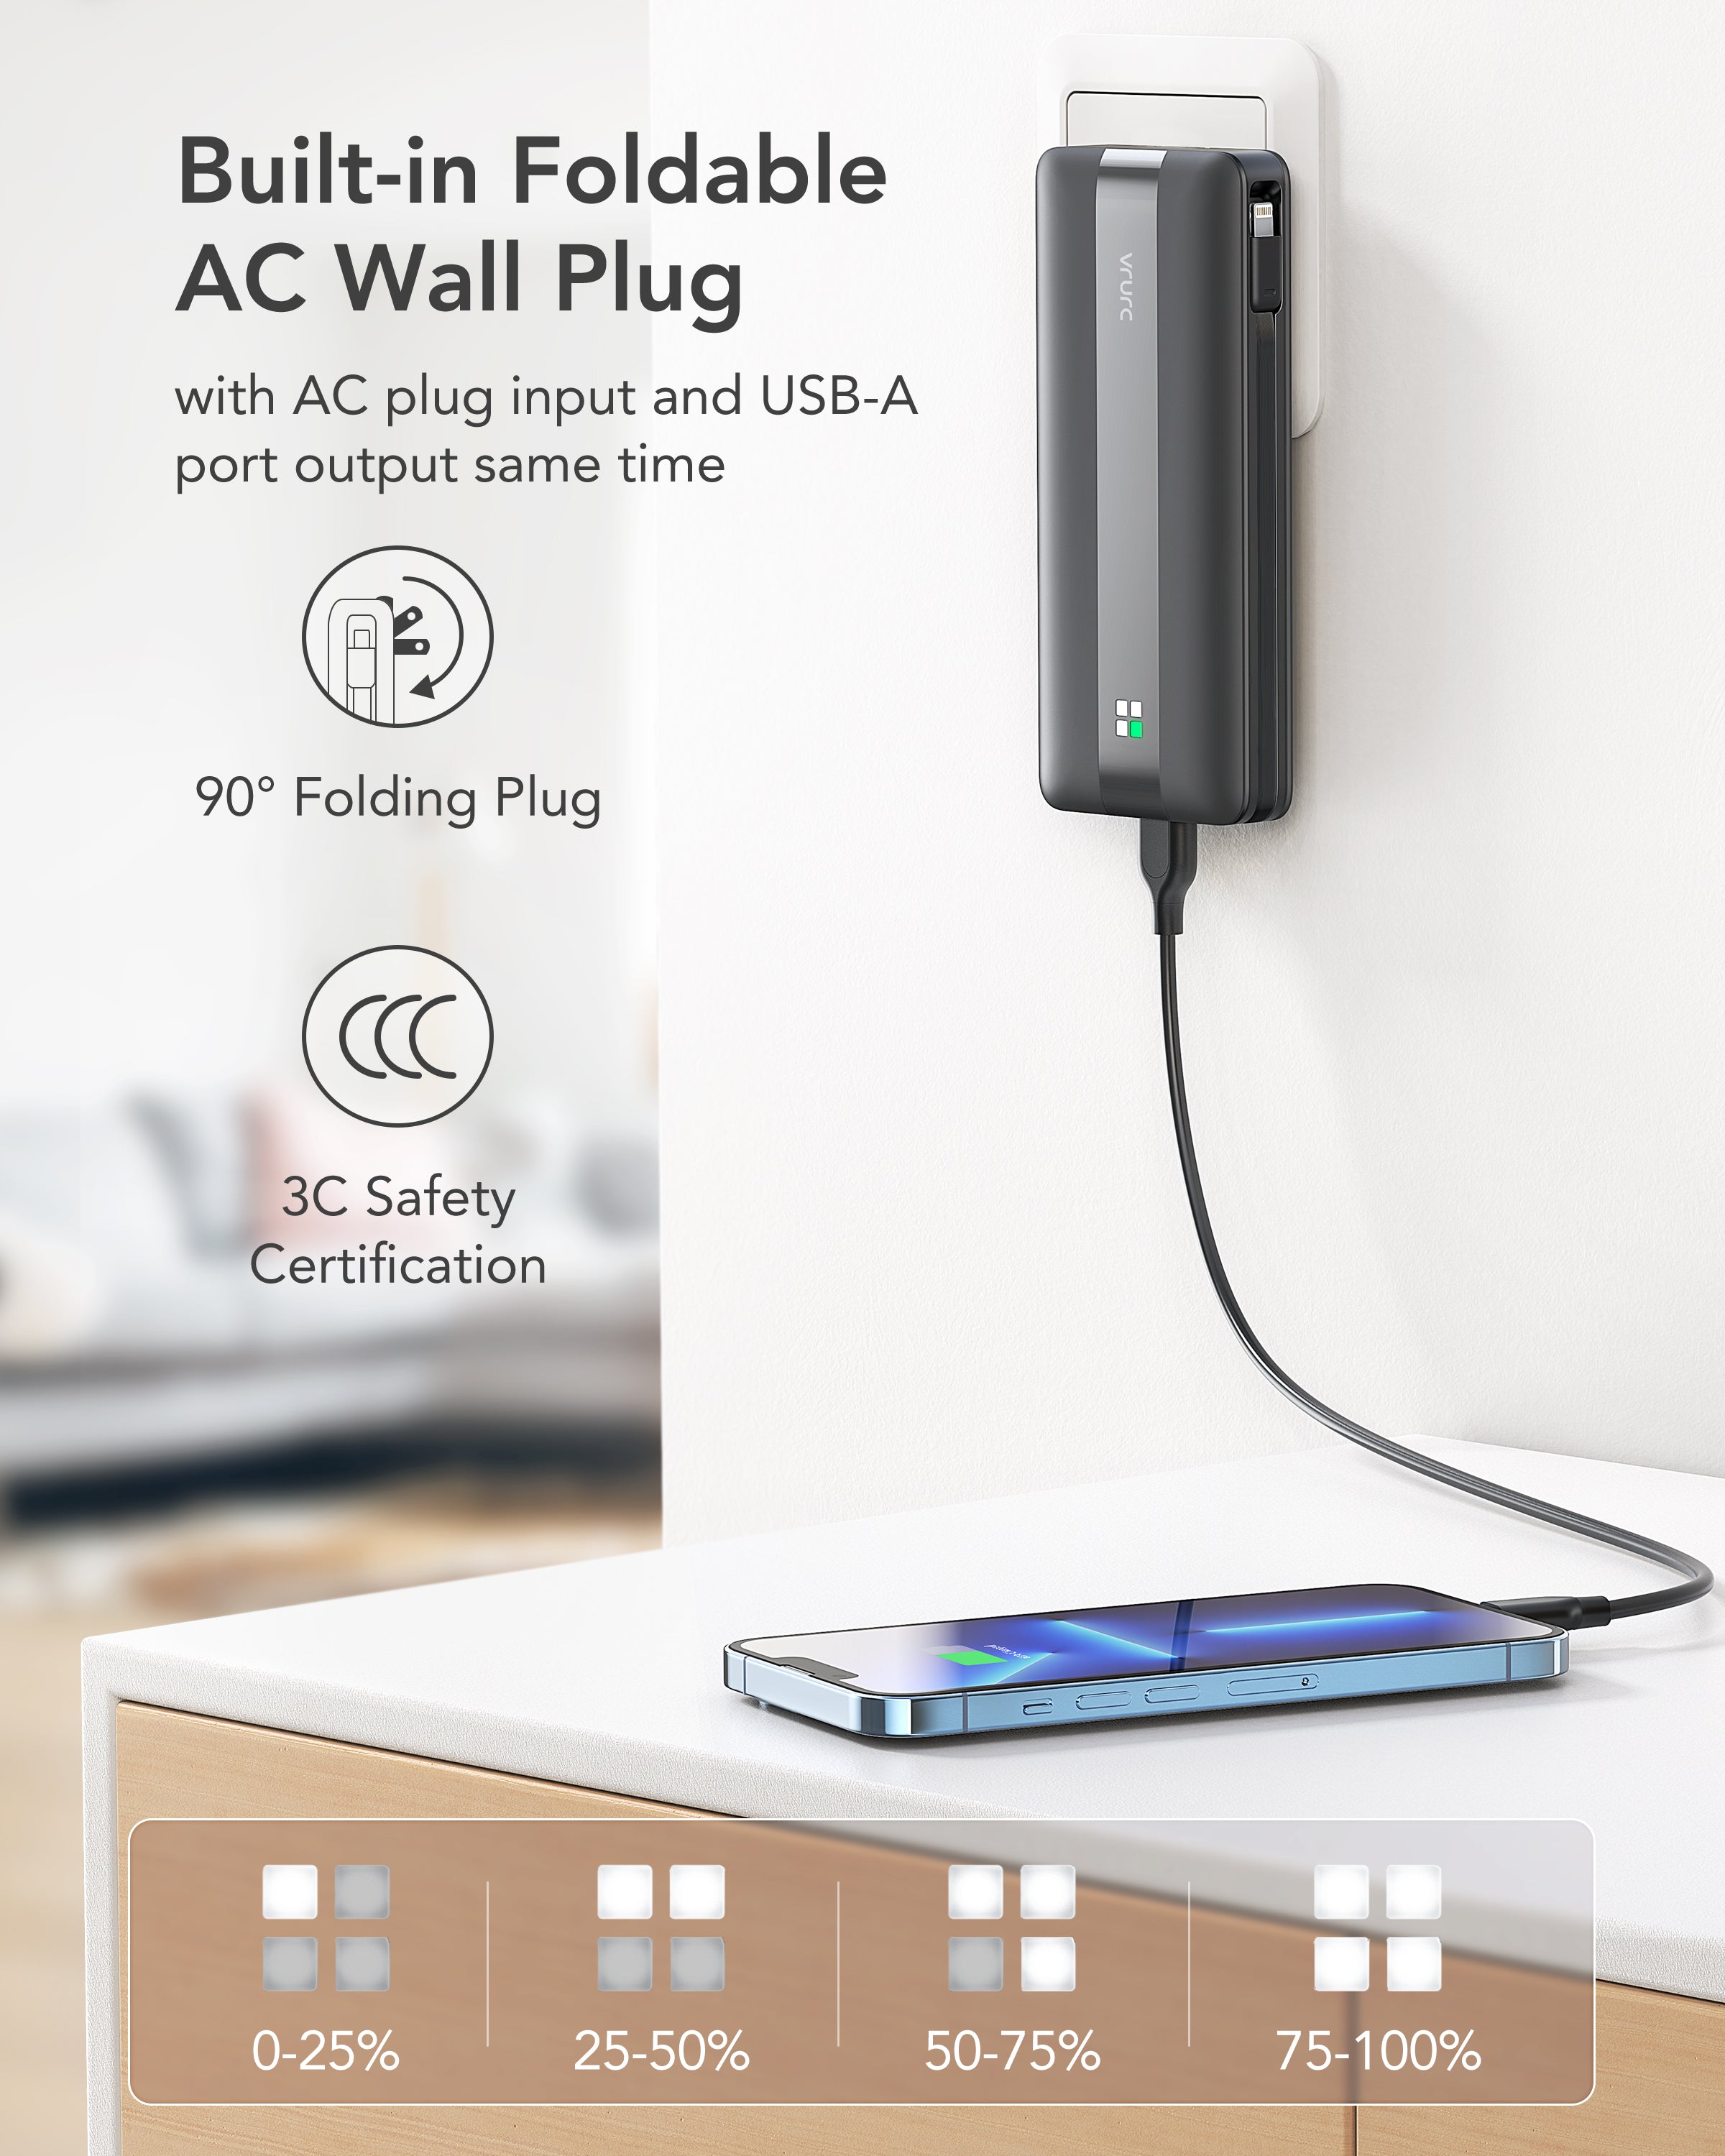 22.5W Built-in Cables Power Bank with AC Wall Plug